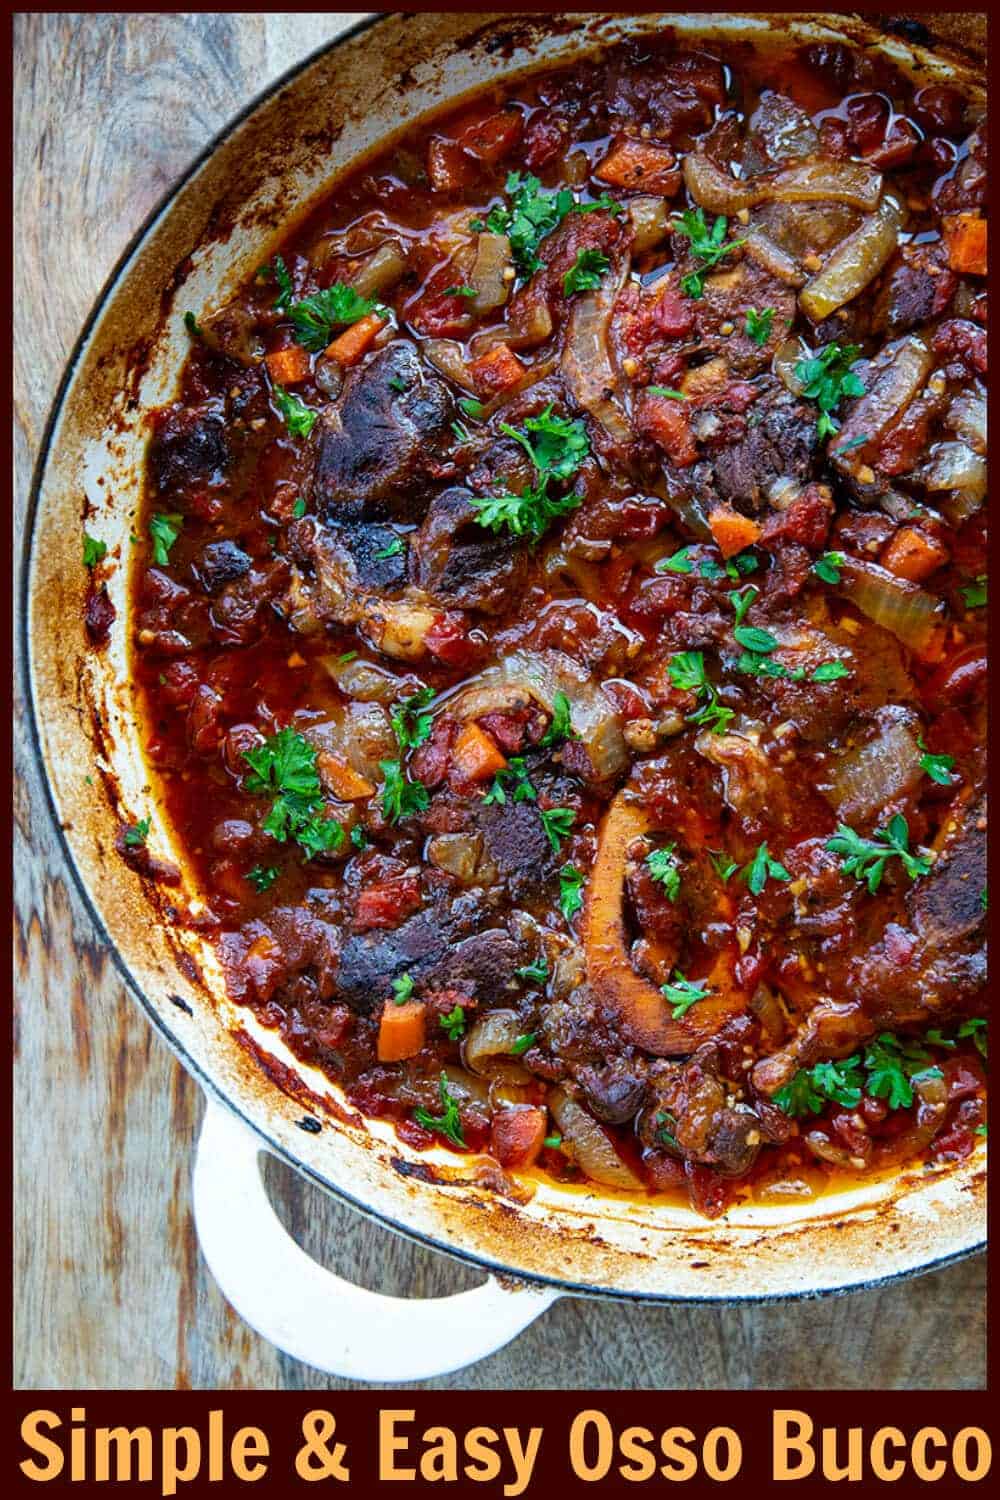 Osso bucco is a delicious tender, flavorful braised beef shank dish that is the perfect way to enjoy this cut of meat. 